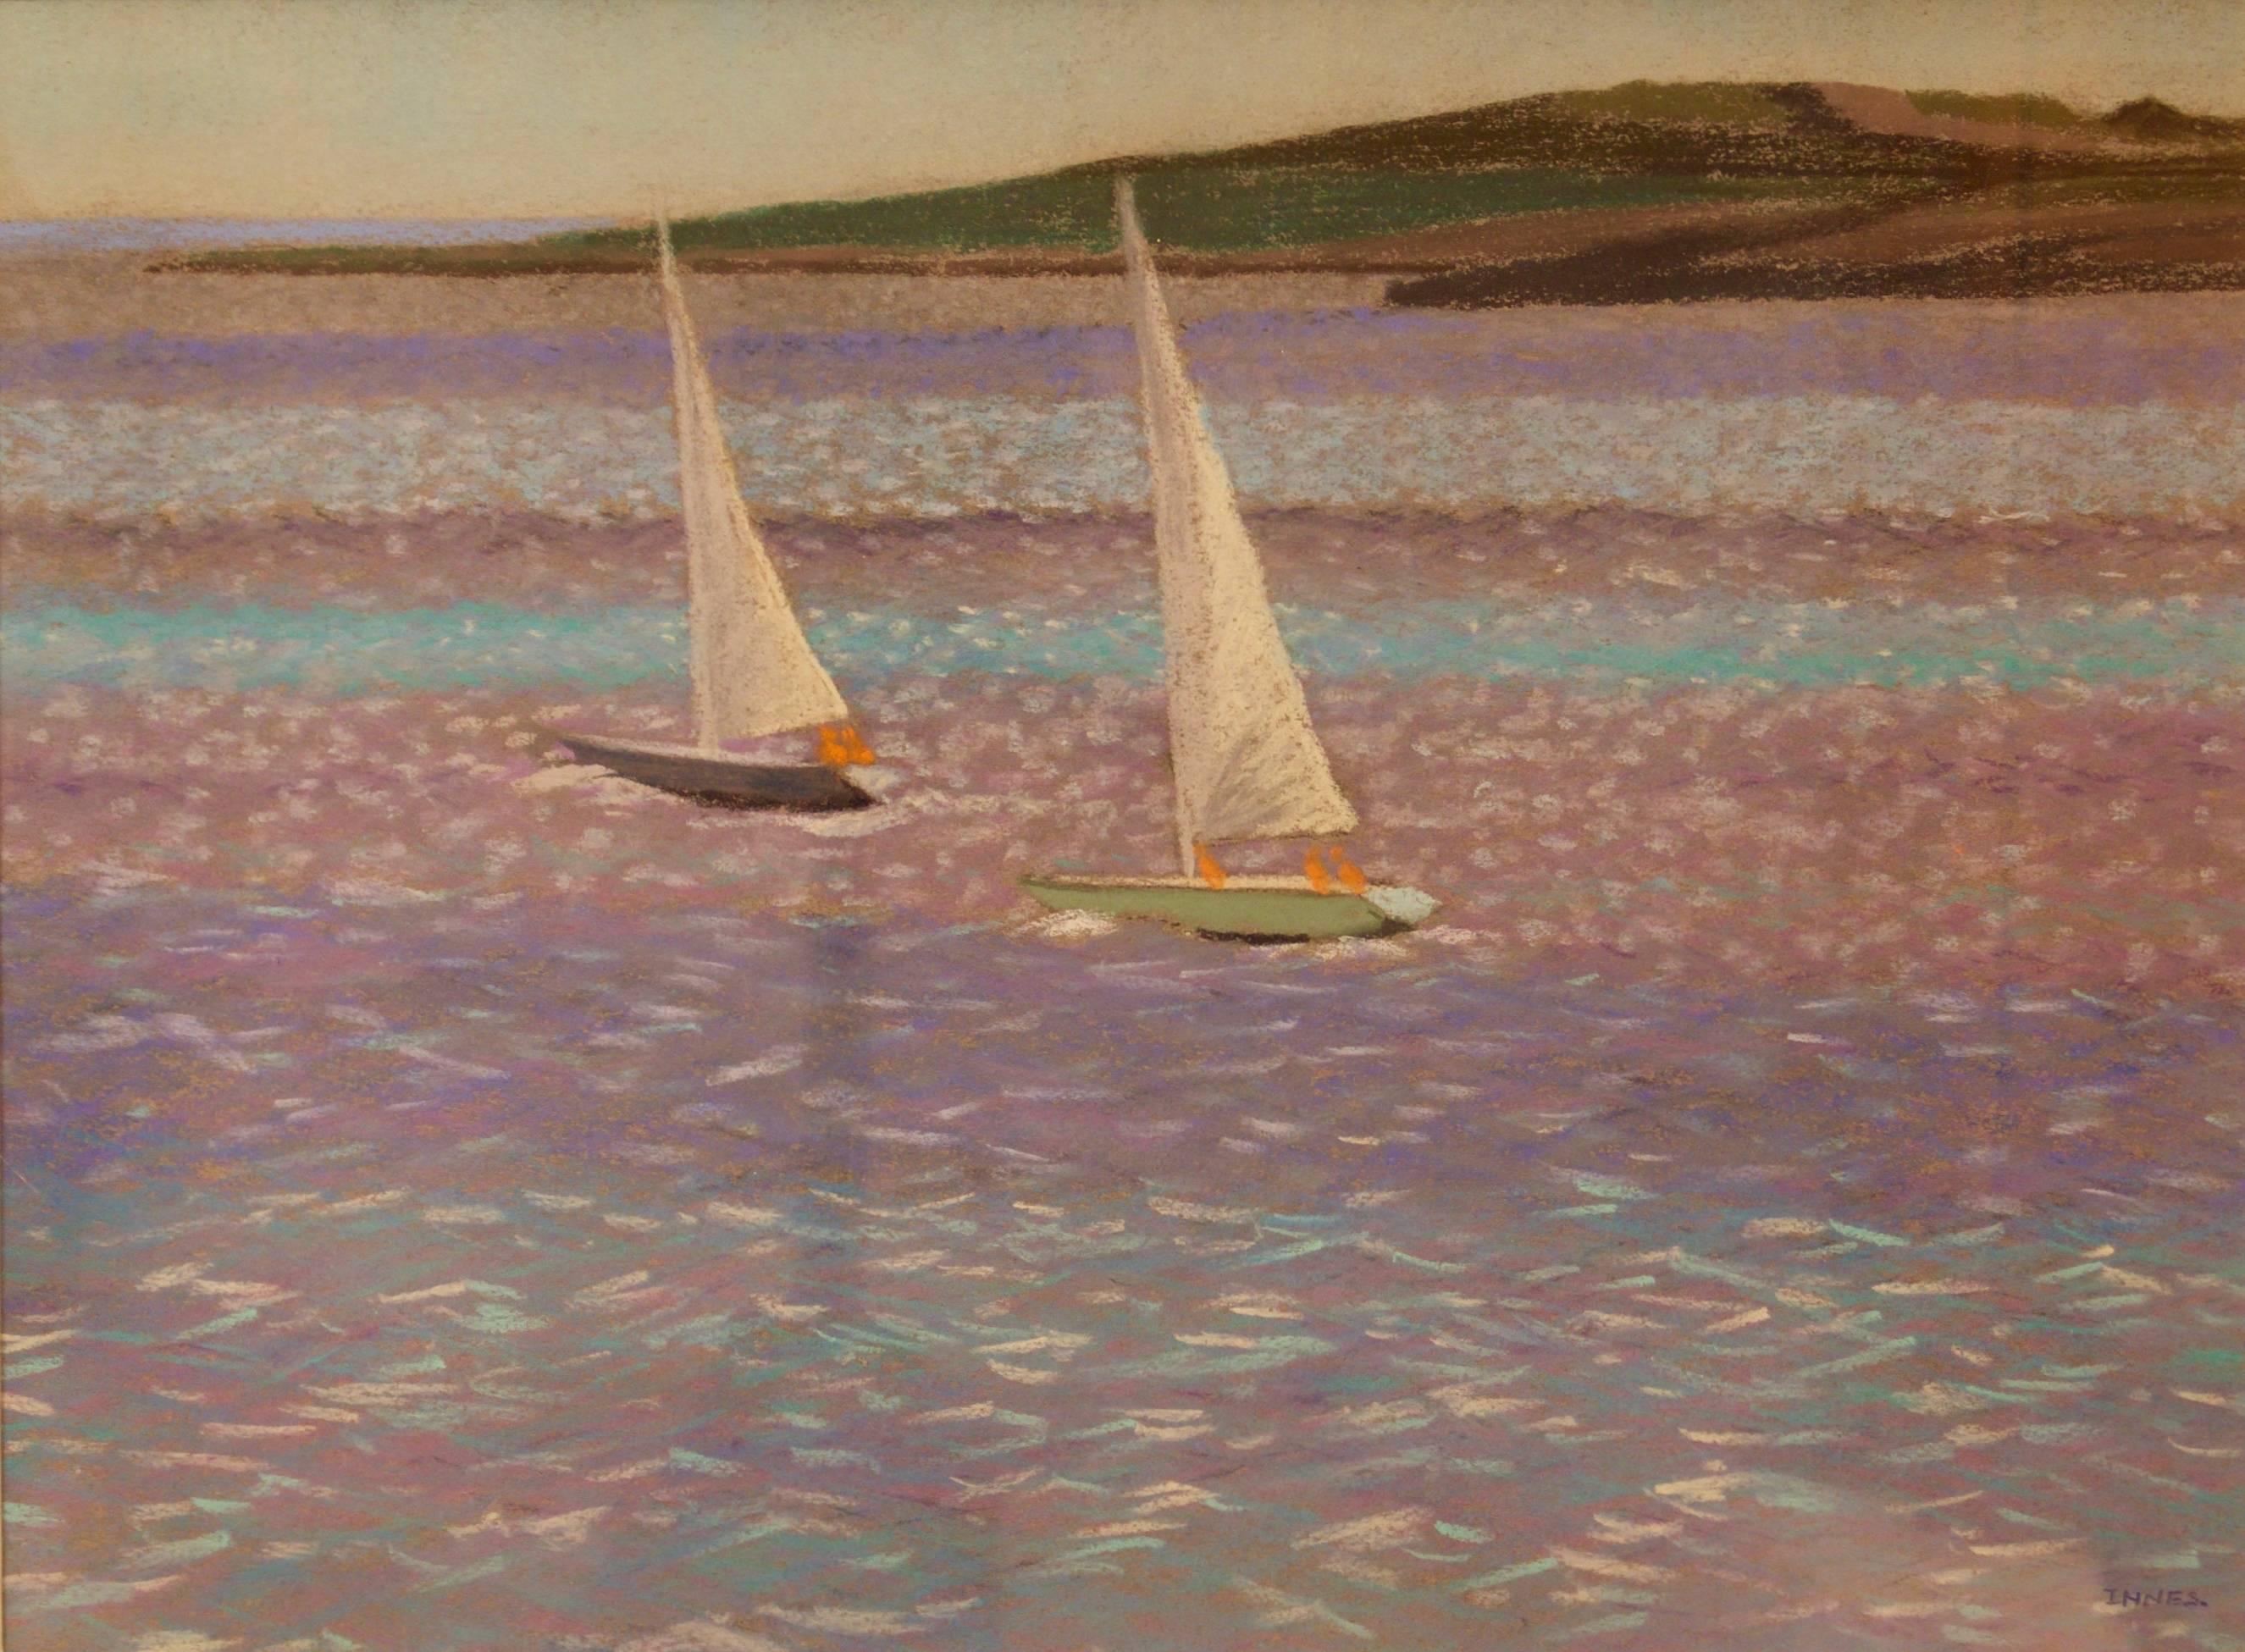 William Henry Innes Landscape Painting - Sail Boats by the Shore - Mid 20th Century Pastel Landscape by William Innes